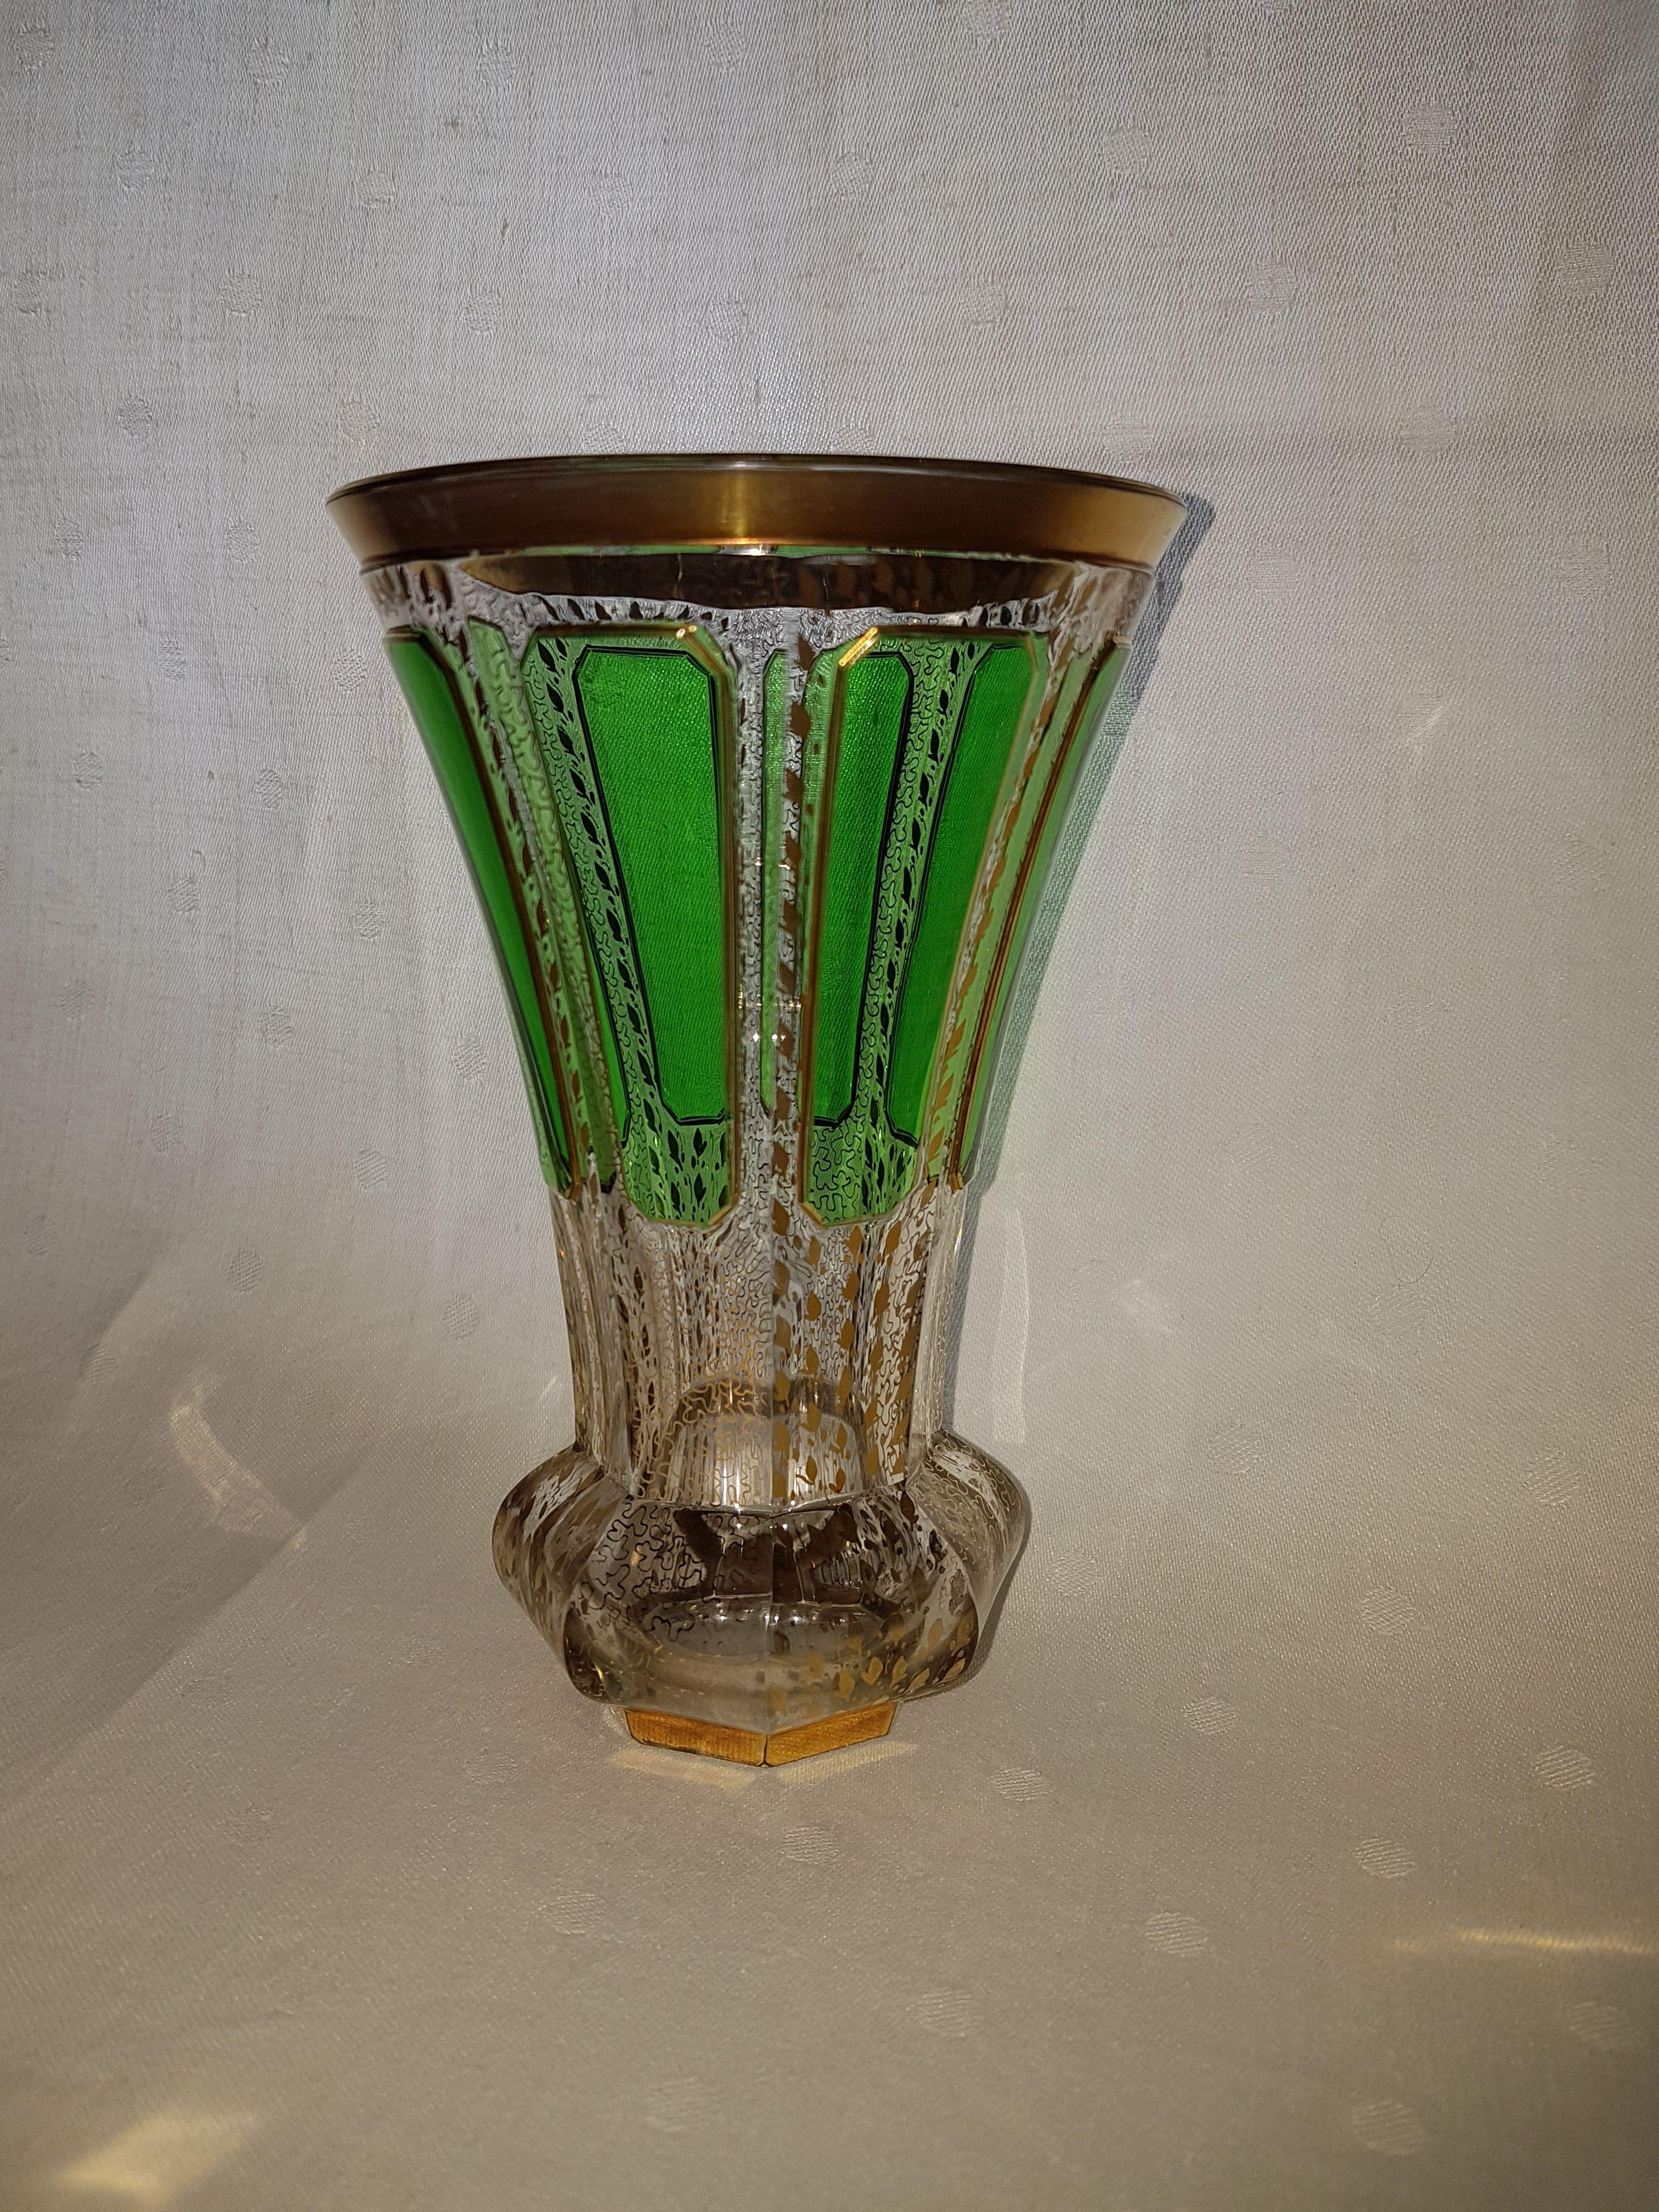 Exquisite Jugendstil stained glass vase with gold applications, made in Austria, circa 1910.
Height 14 cm / 5.51 inches - Diameter  (Top) 9 cm / 3.54 inches
Very charming objet d'art.
